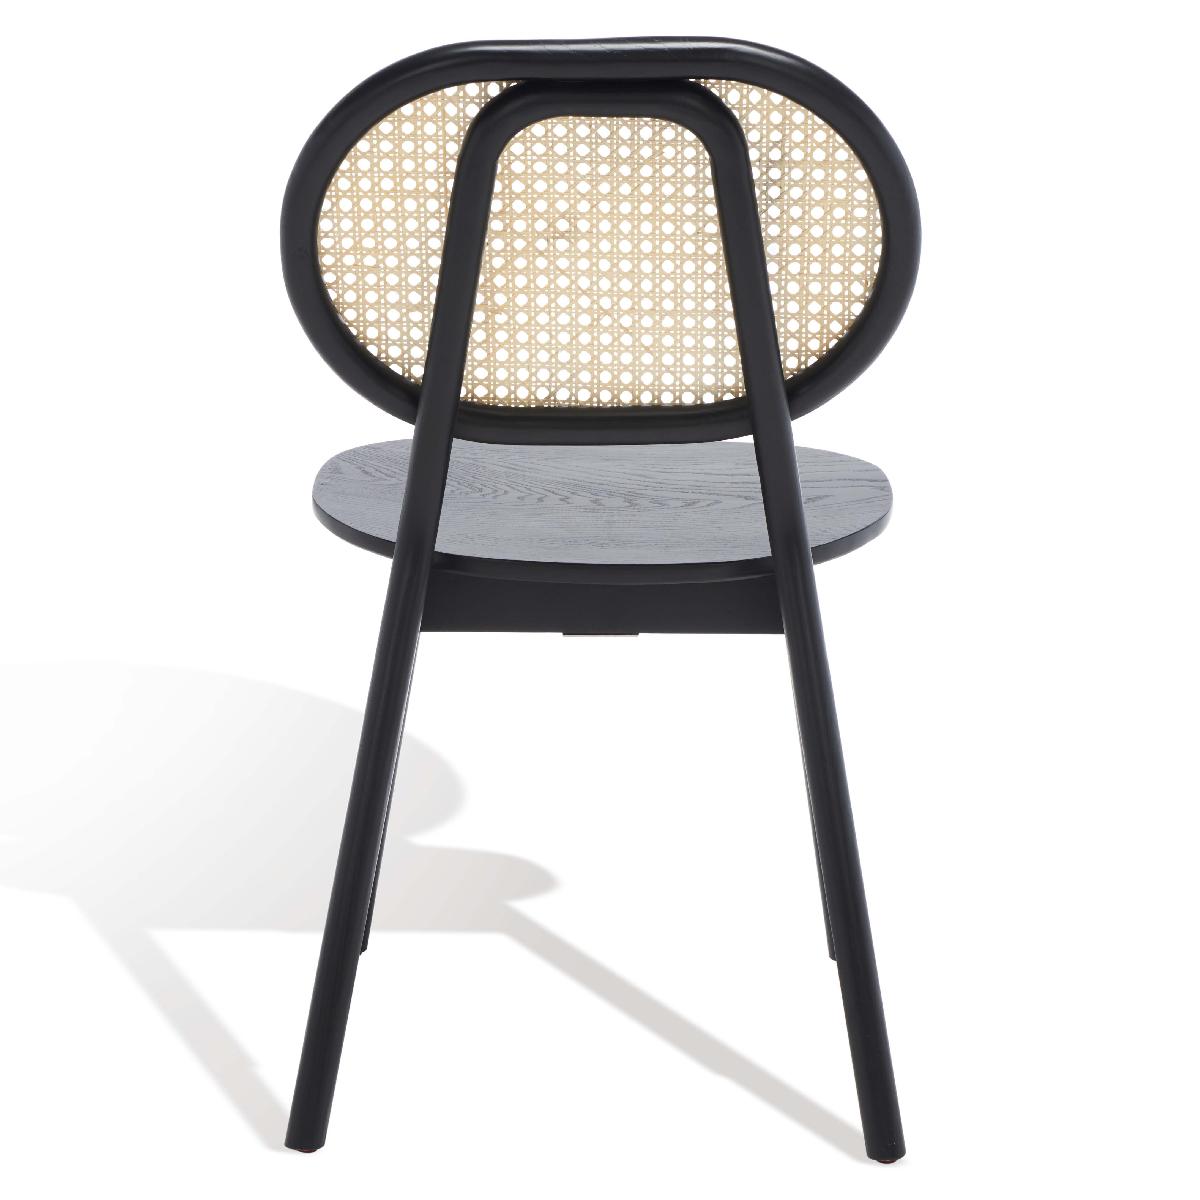 Safavieh Couture Kristianna Rattan Back Dining Chair(Set of 2) , SFV4127 - Black / Natural